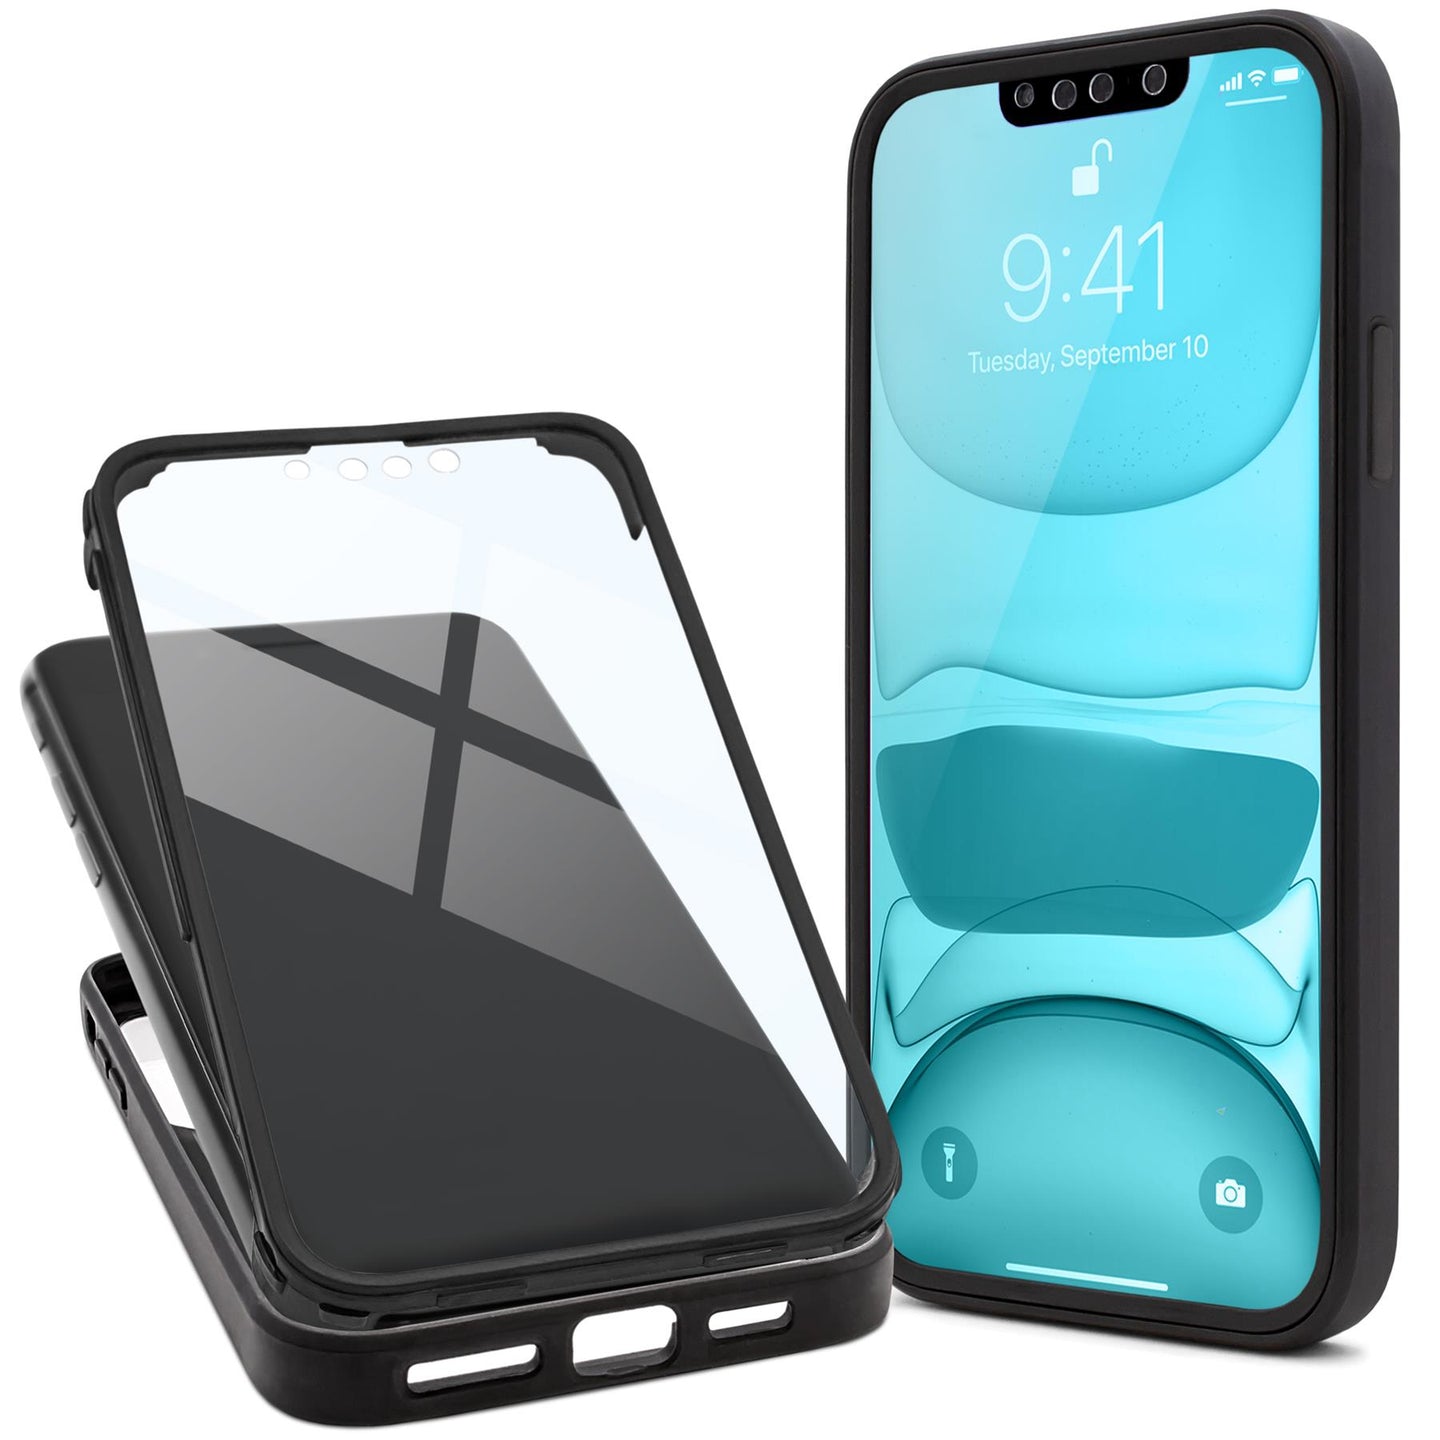 Moozy 360 Case for iPhone 13 - Black Rim Transparent Case, Full Body Double-sided Protection, Cover with Built-in Screen Protector